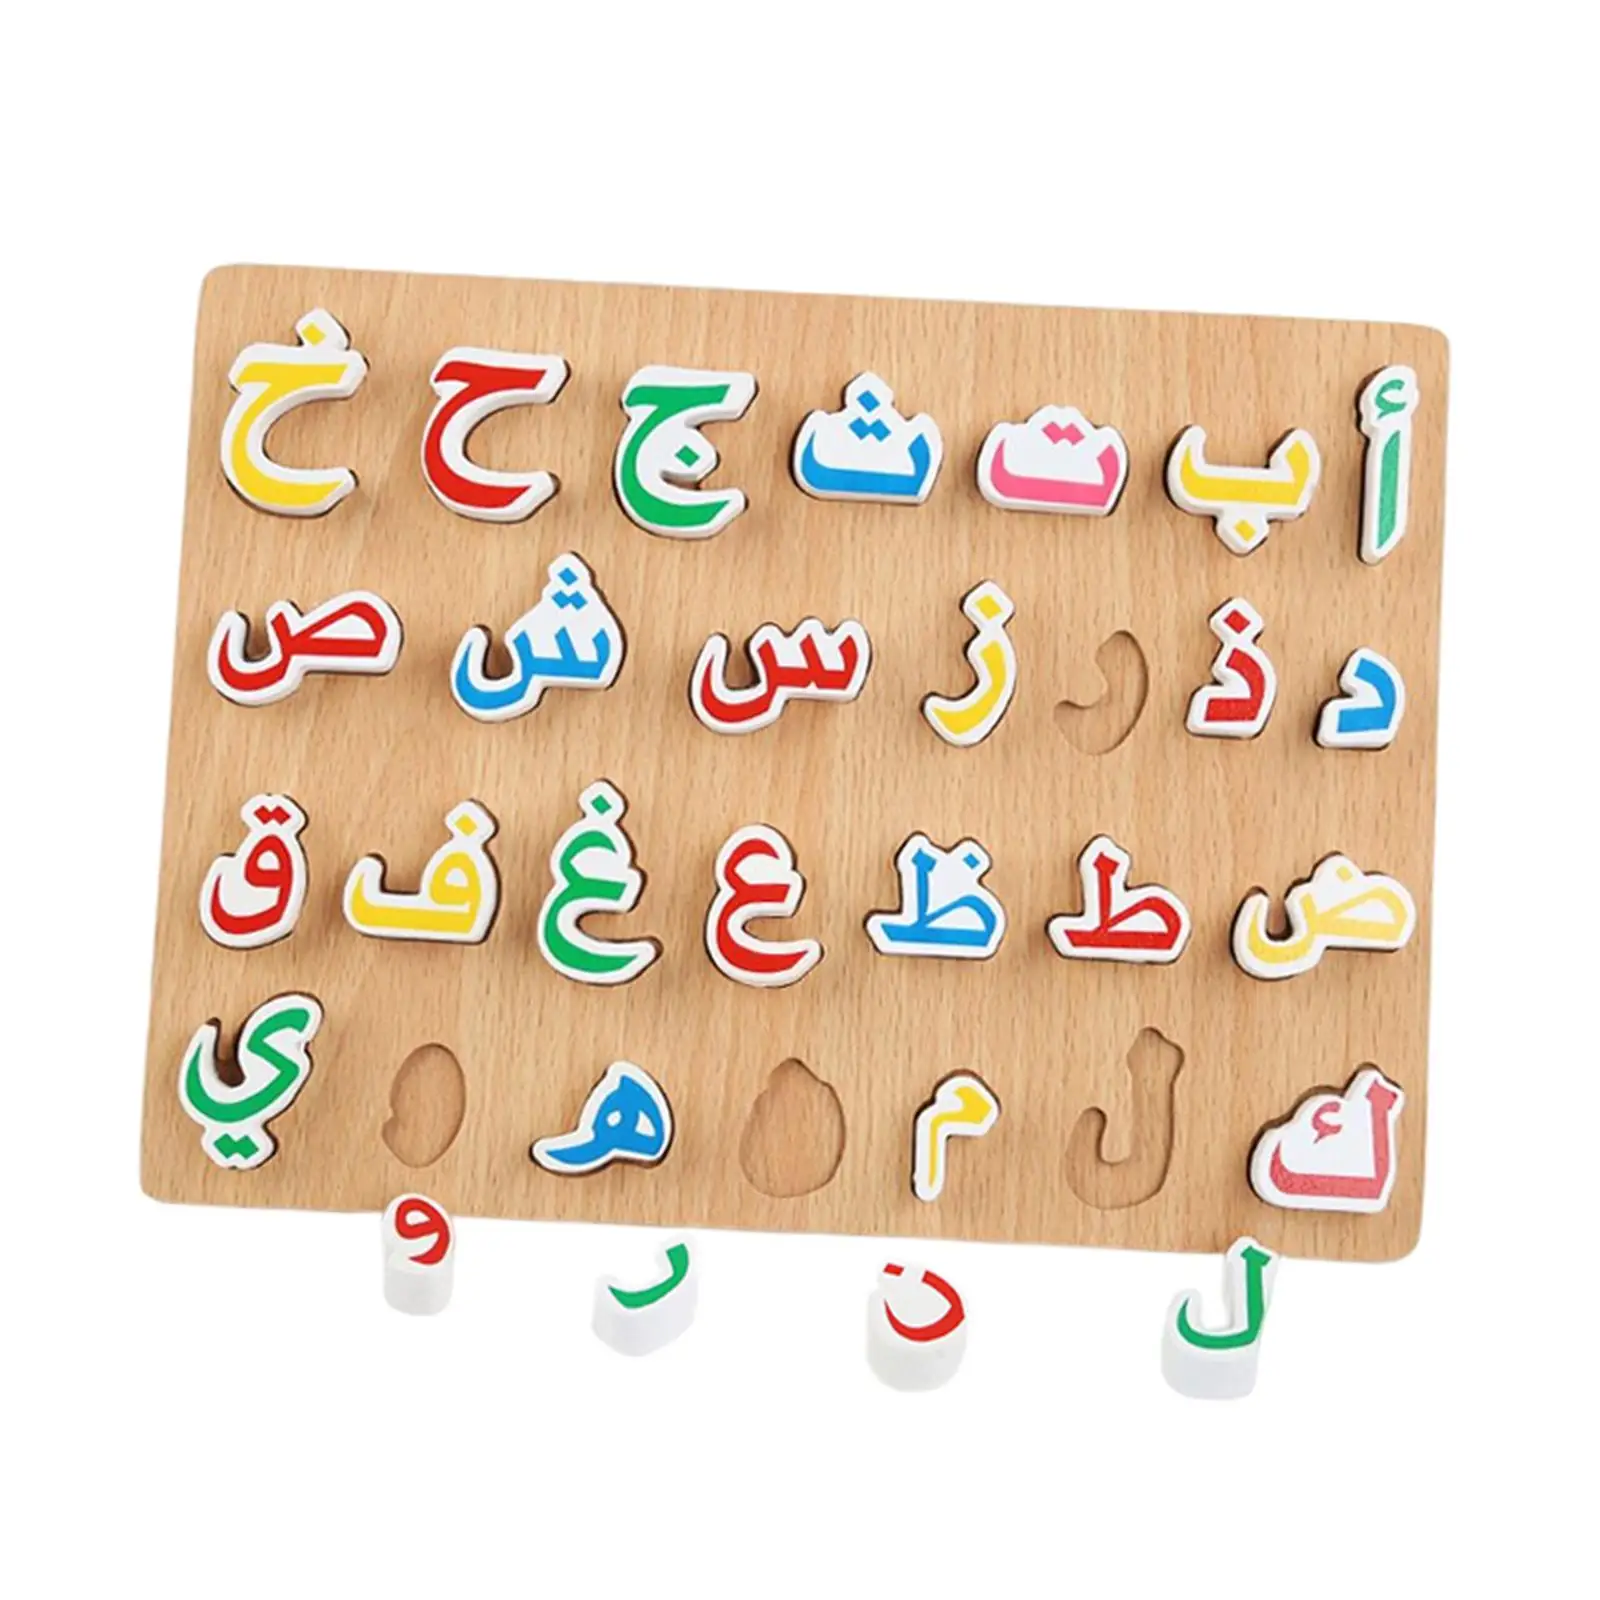 Wooden Toddlers Arabic Alphabet Puzzles Board for Children to Learn Arabic